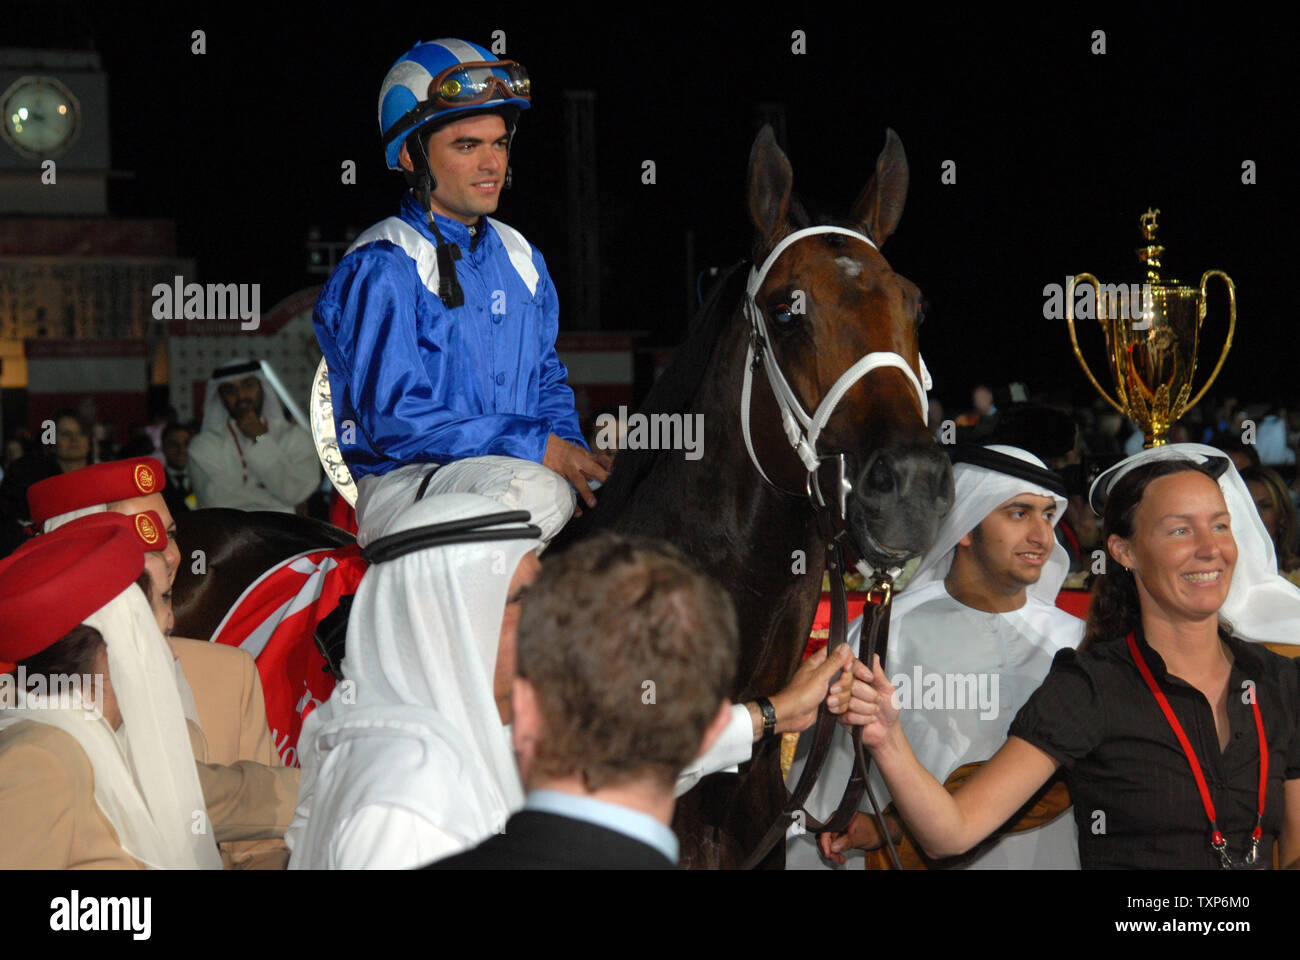 Jockey Fernado Jara sits on Invasor (7), owned by the deputy ruler of Dubai and UAE Minister of Finance and Industry, Sheikh Hamdan bin Rasid Al Maktoum, after winning the final six million dollar prize at the 12th Dubai World Cup on March 31, 2007. The one day, seven race Dubai World Cup is the richest horse race in the world with a total purse worth over 21 million U.S. dollars. (UPI Photo/Kamal Moghrabi) Stock Photo